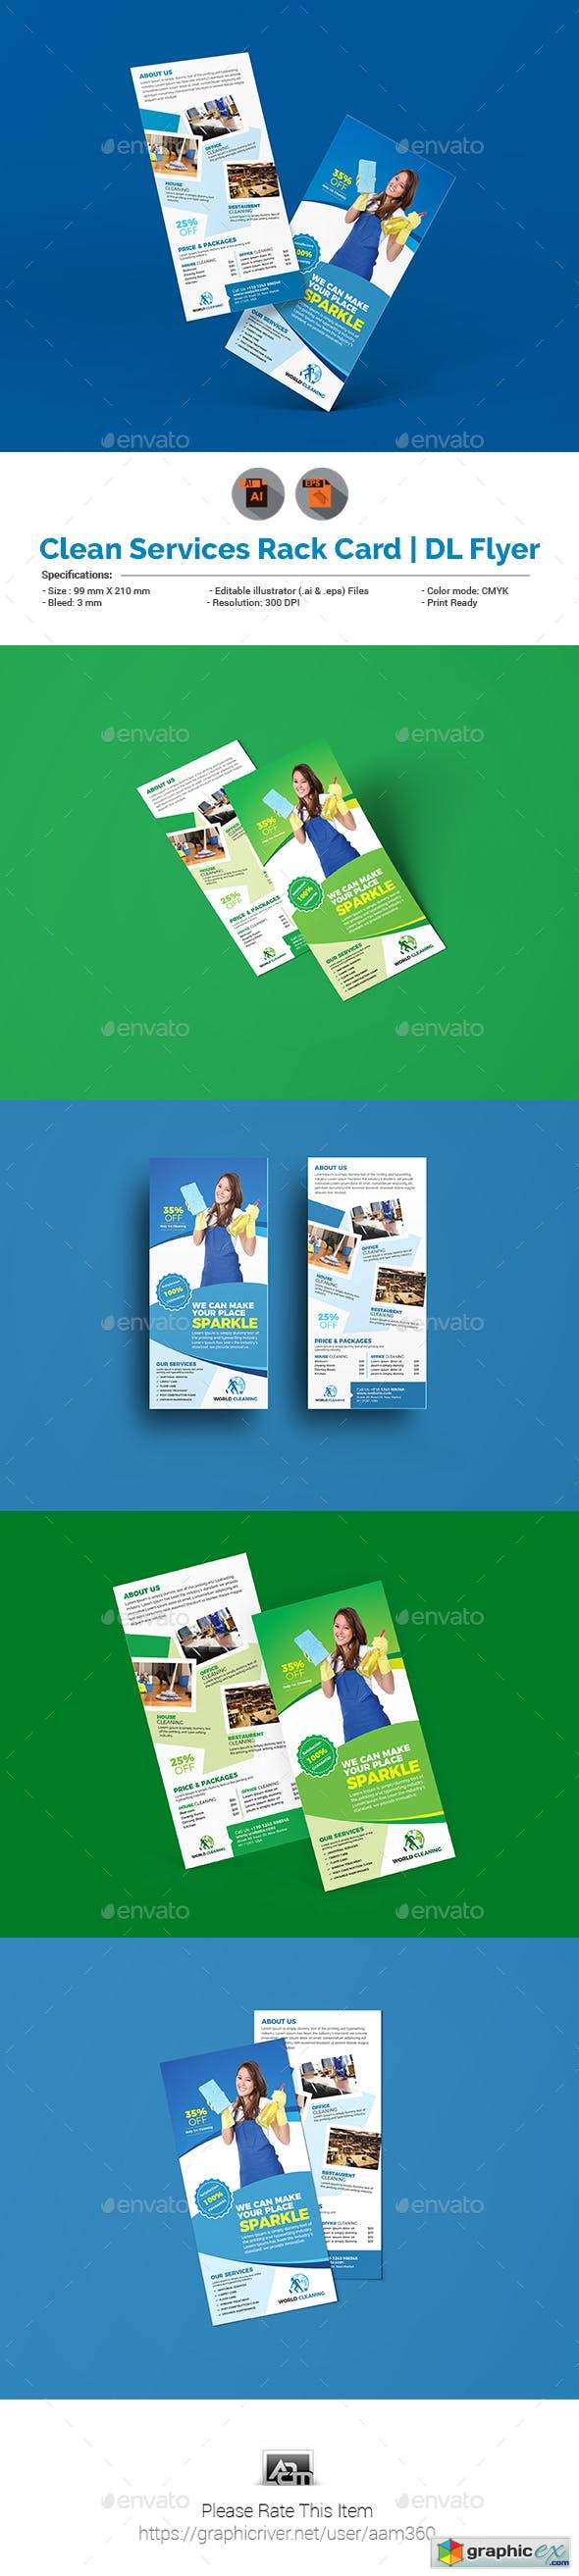 Cleaning Service Rack Card DL Flyer Template